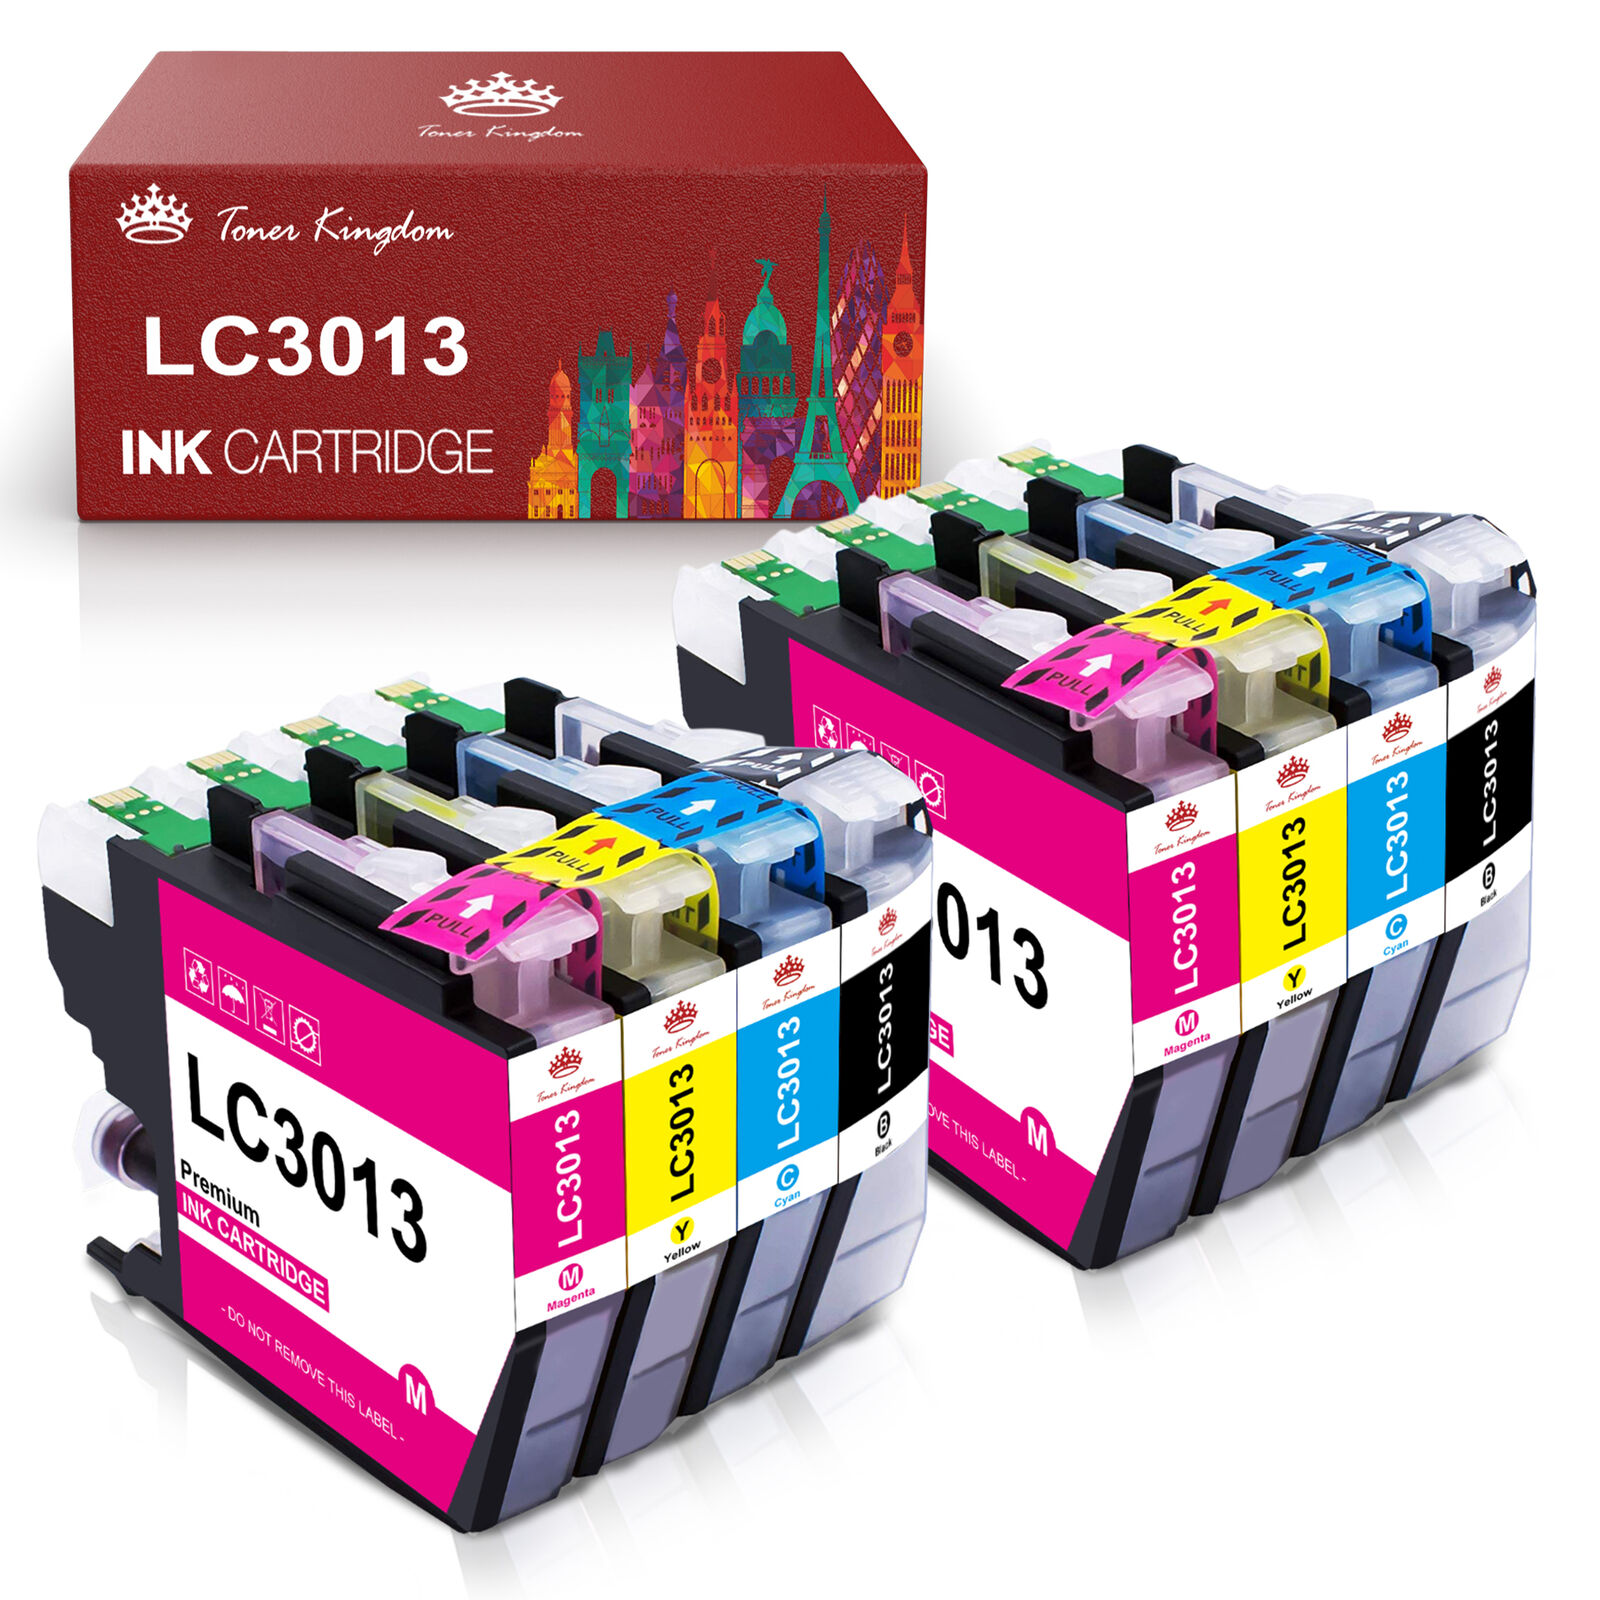 8x Ink compatible for Brother LC3013 LC3011 MFC-J491DW J497DW MFC-J690DW Printer